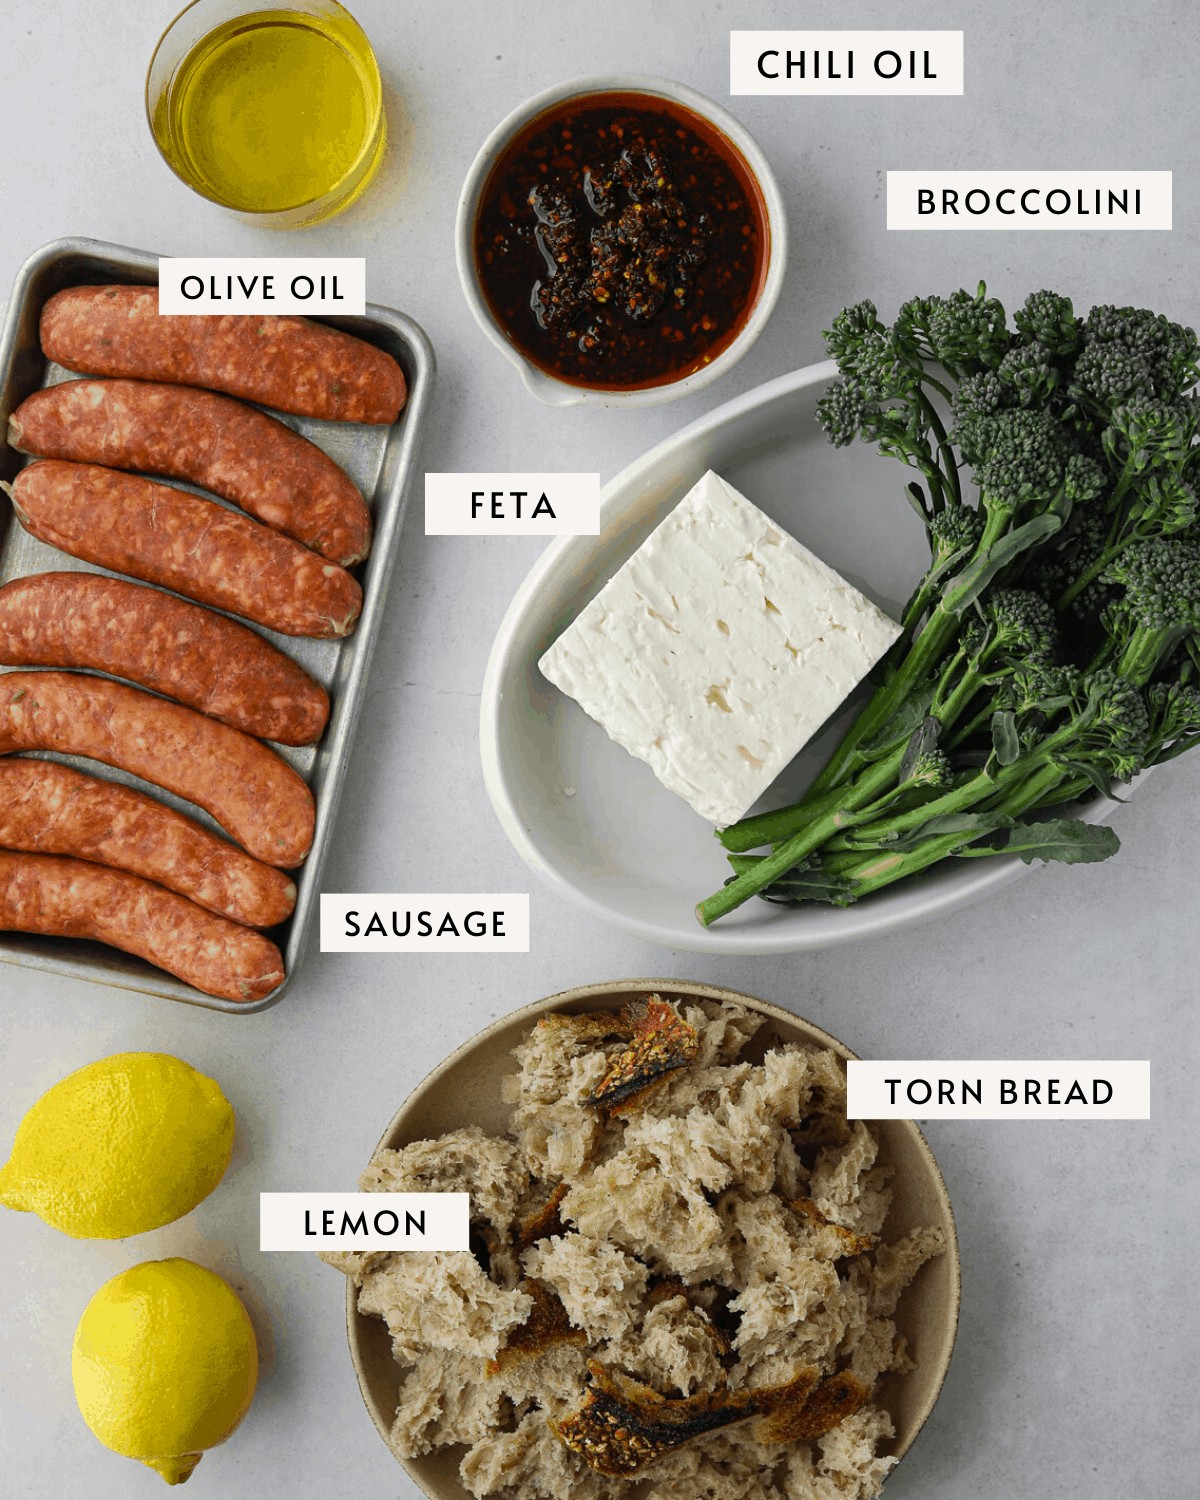 recipe ingredients raw sausages, a bunch of broccolini, a block of feta cheese, chili oil and bread